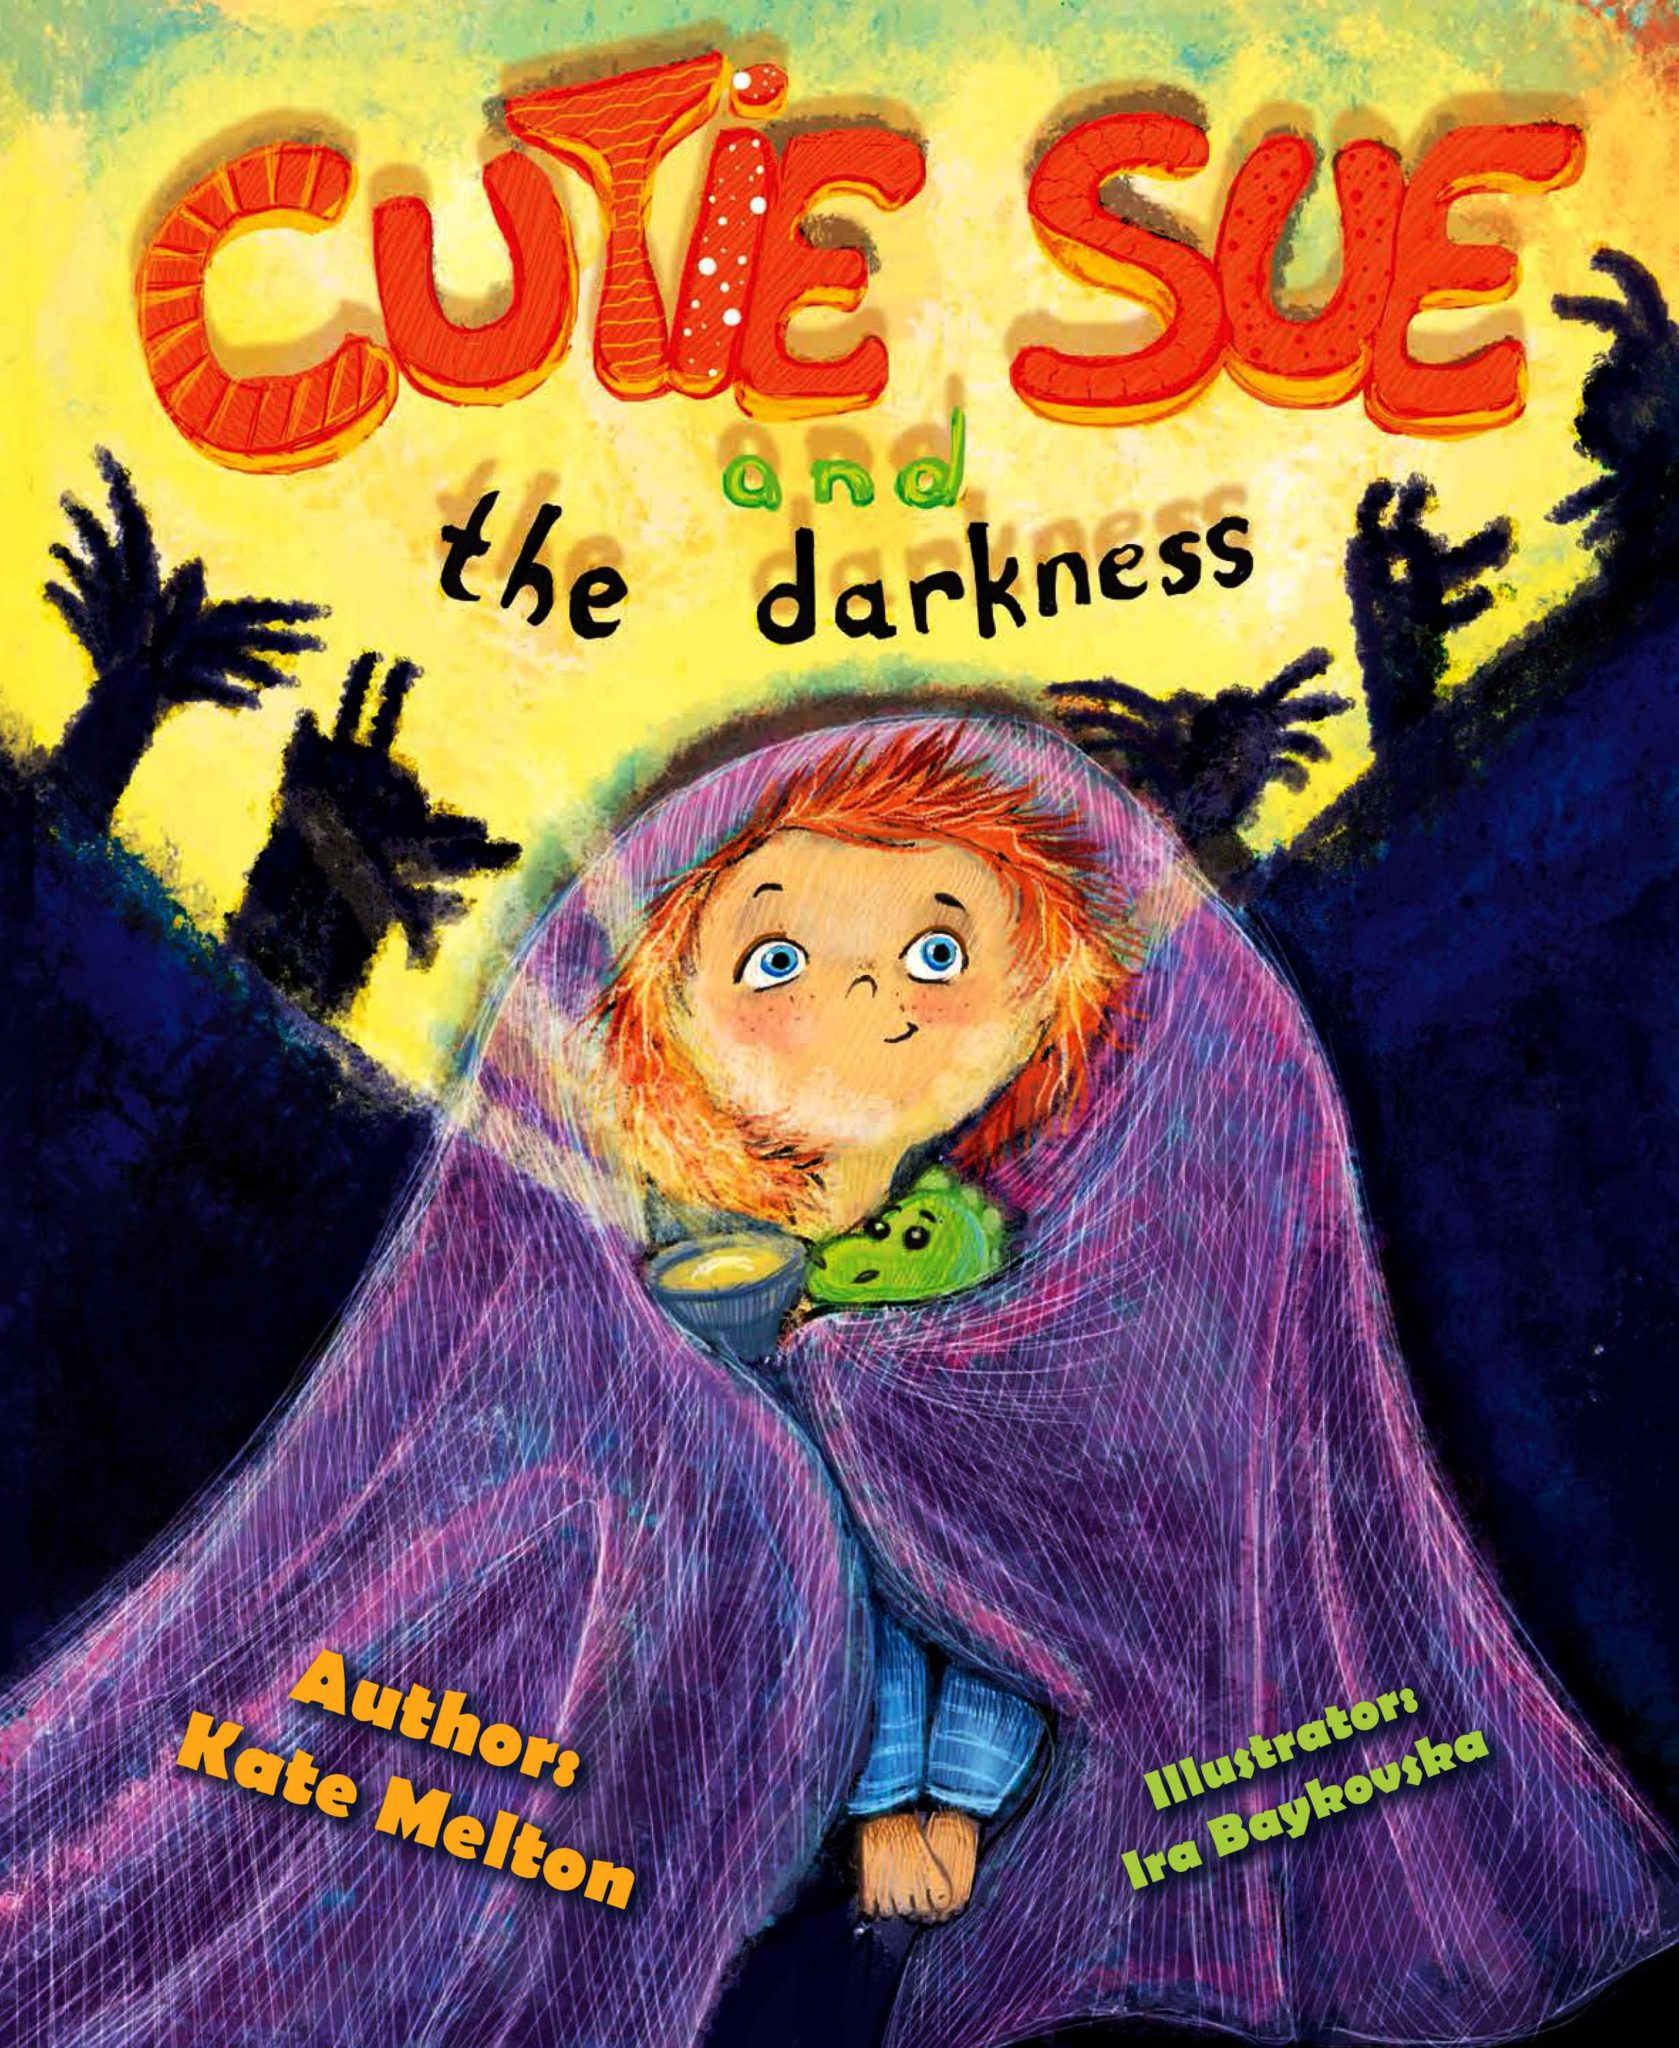 FREE: Cutie Sue and the Darkness: An Absolutely Adorable Bedtime Story, Ages 3-6 by Kate Melton